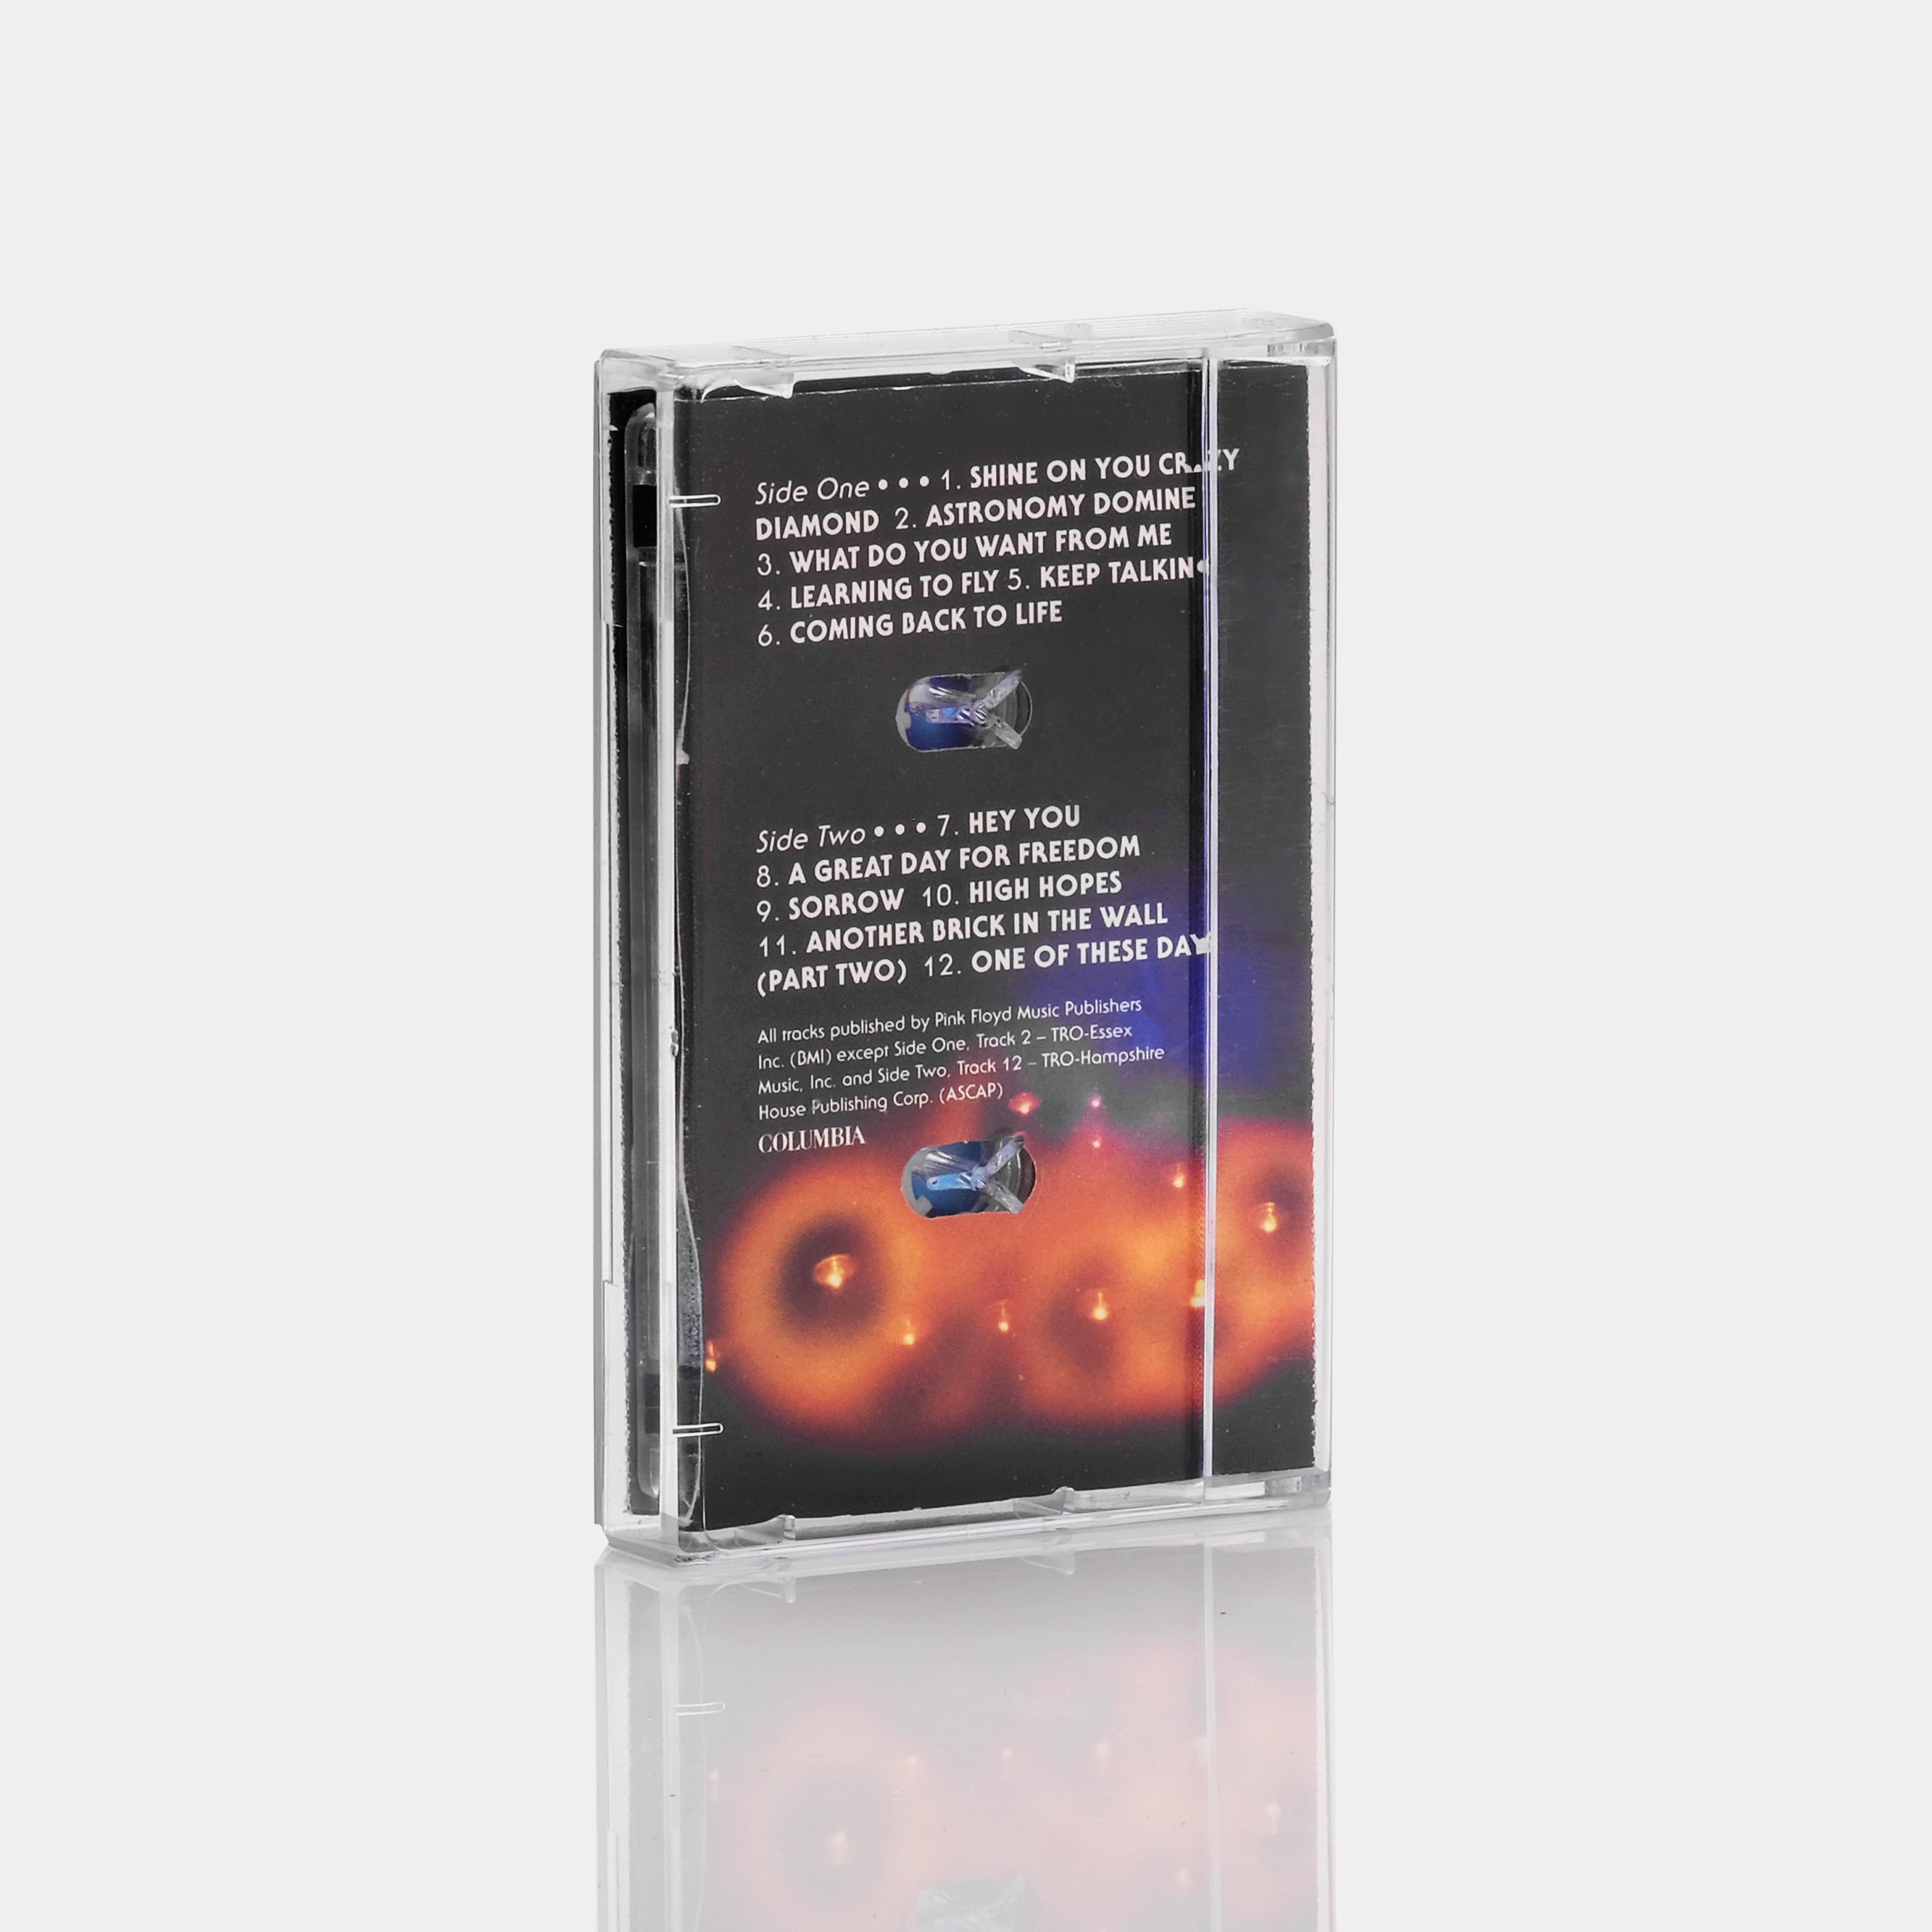 Pink Floyd - Live: Delicate Sound of Thunder (Tape 2) Cassette Tape